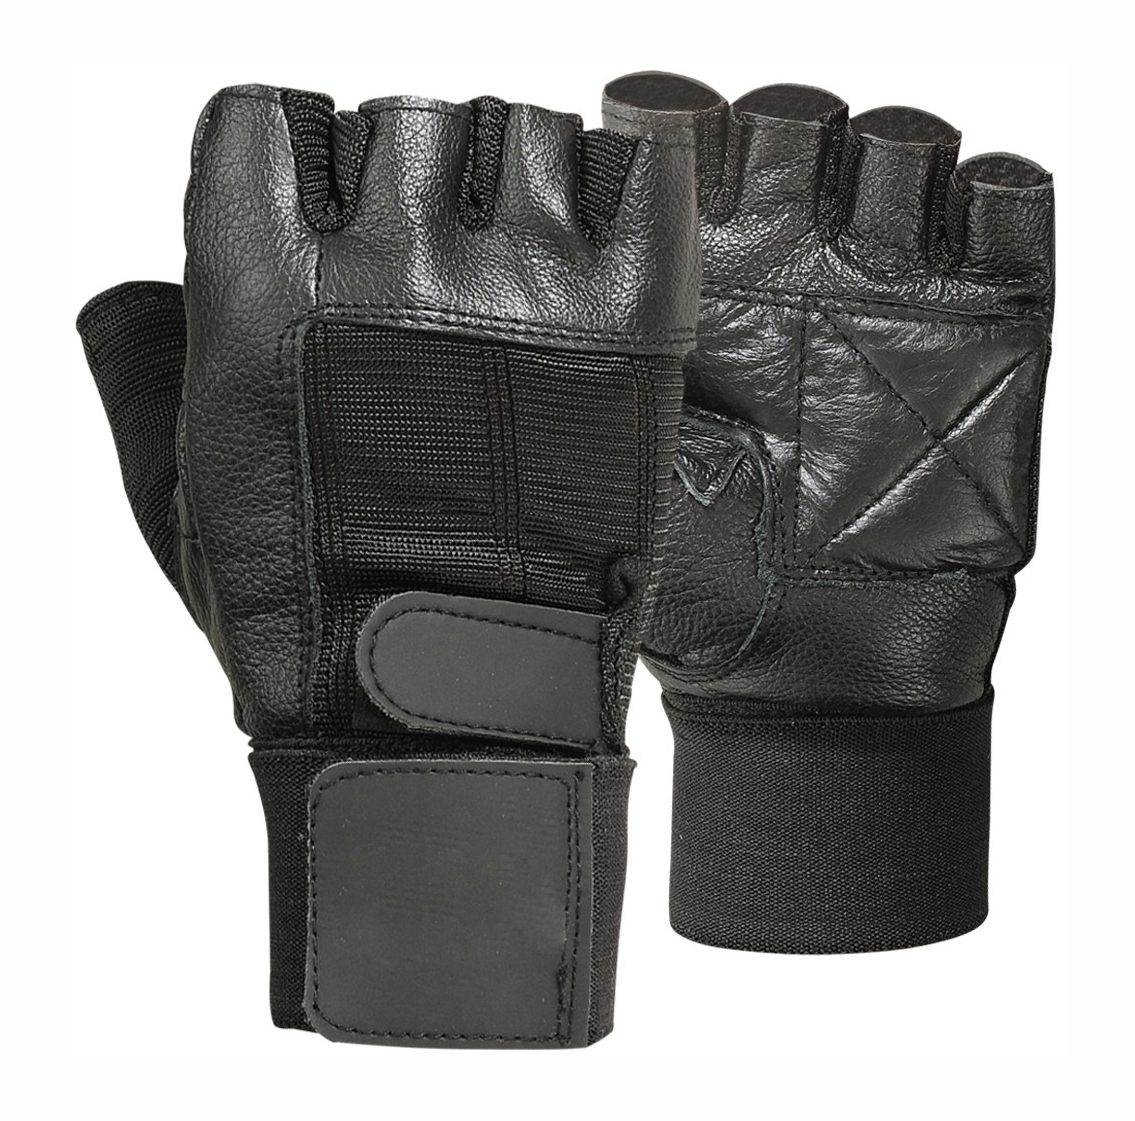 Trideer Weight Lifting Gloves with Wrist Wraps Support Pro Padded Gym Gloves for Powerlifting